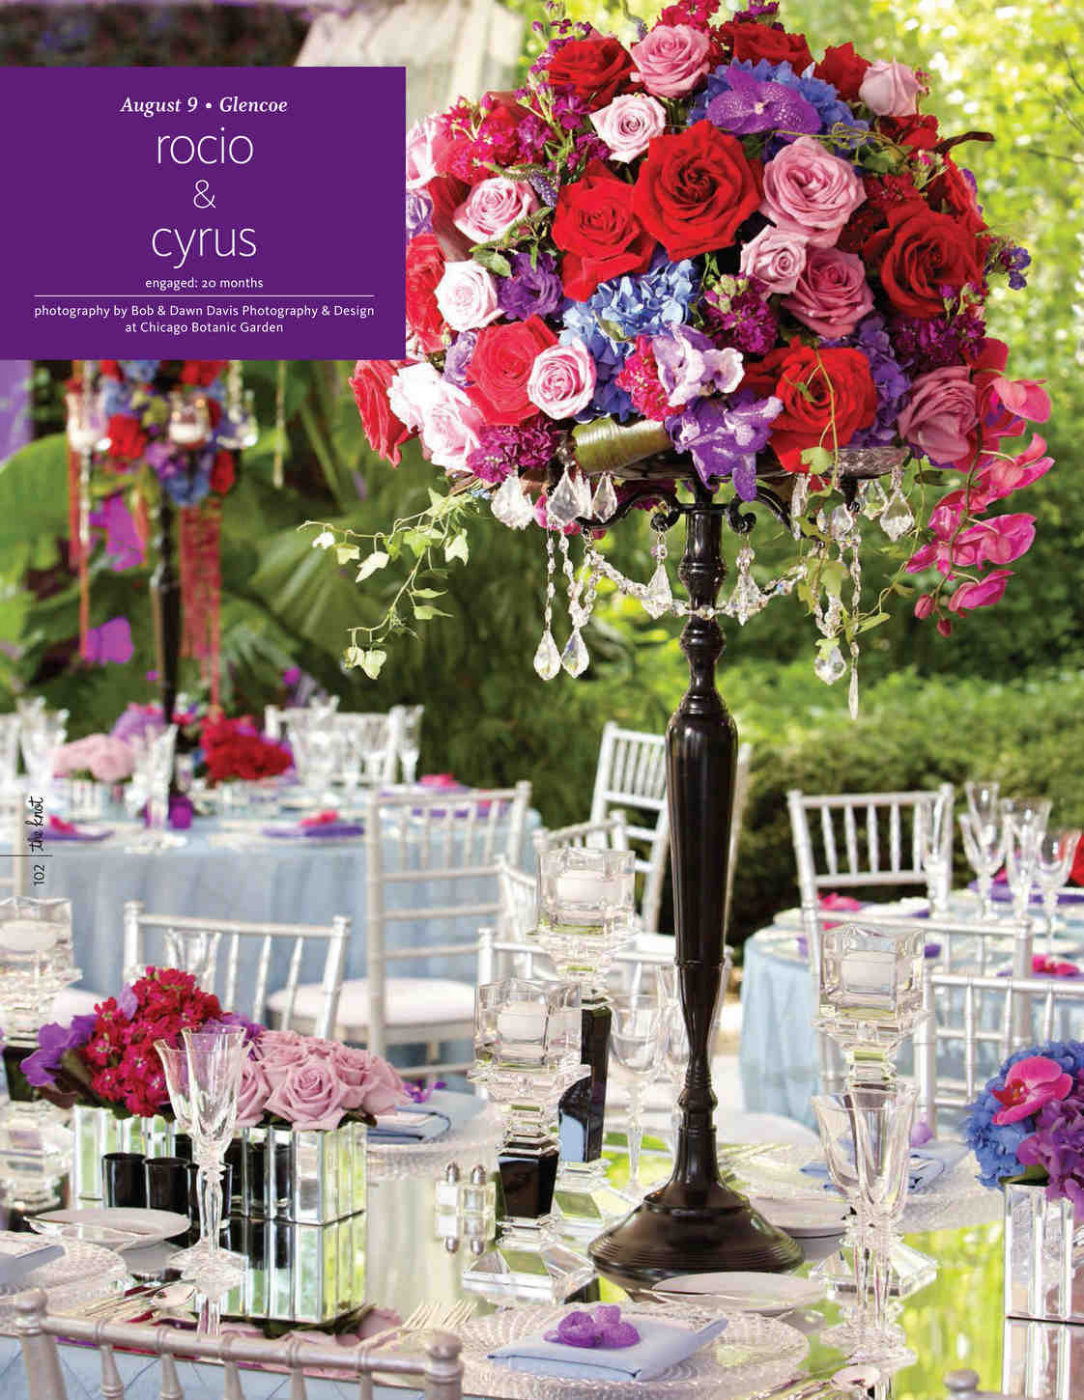 This colorful wedding at the Chicago Botanic Garden is featured in The Knot-Chicago Fall-Winter 2015 edition and we couldn't be more happy for Rocio and Cyrus. A million thank yous to Carly Jackson and Rebecca Crumley at The Knot for selecting this wedding. We wouldn't have met this couple if it wasn't for Claire Weller at Big City Bride, big hugs girlie!!! She, along with Studio AG Design did an amazing job bringing their dream wedding to fruition! Click here for a list of vendors.